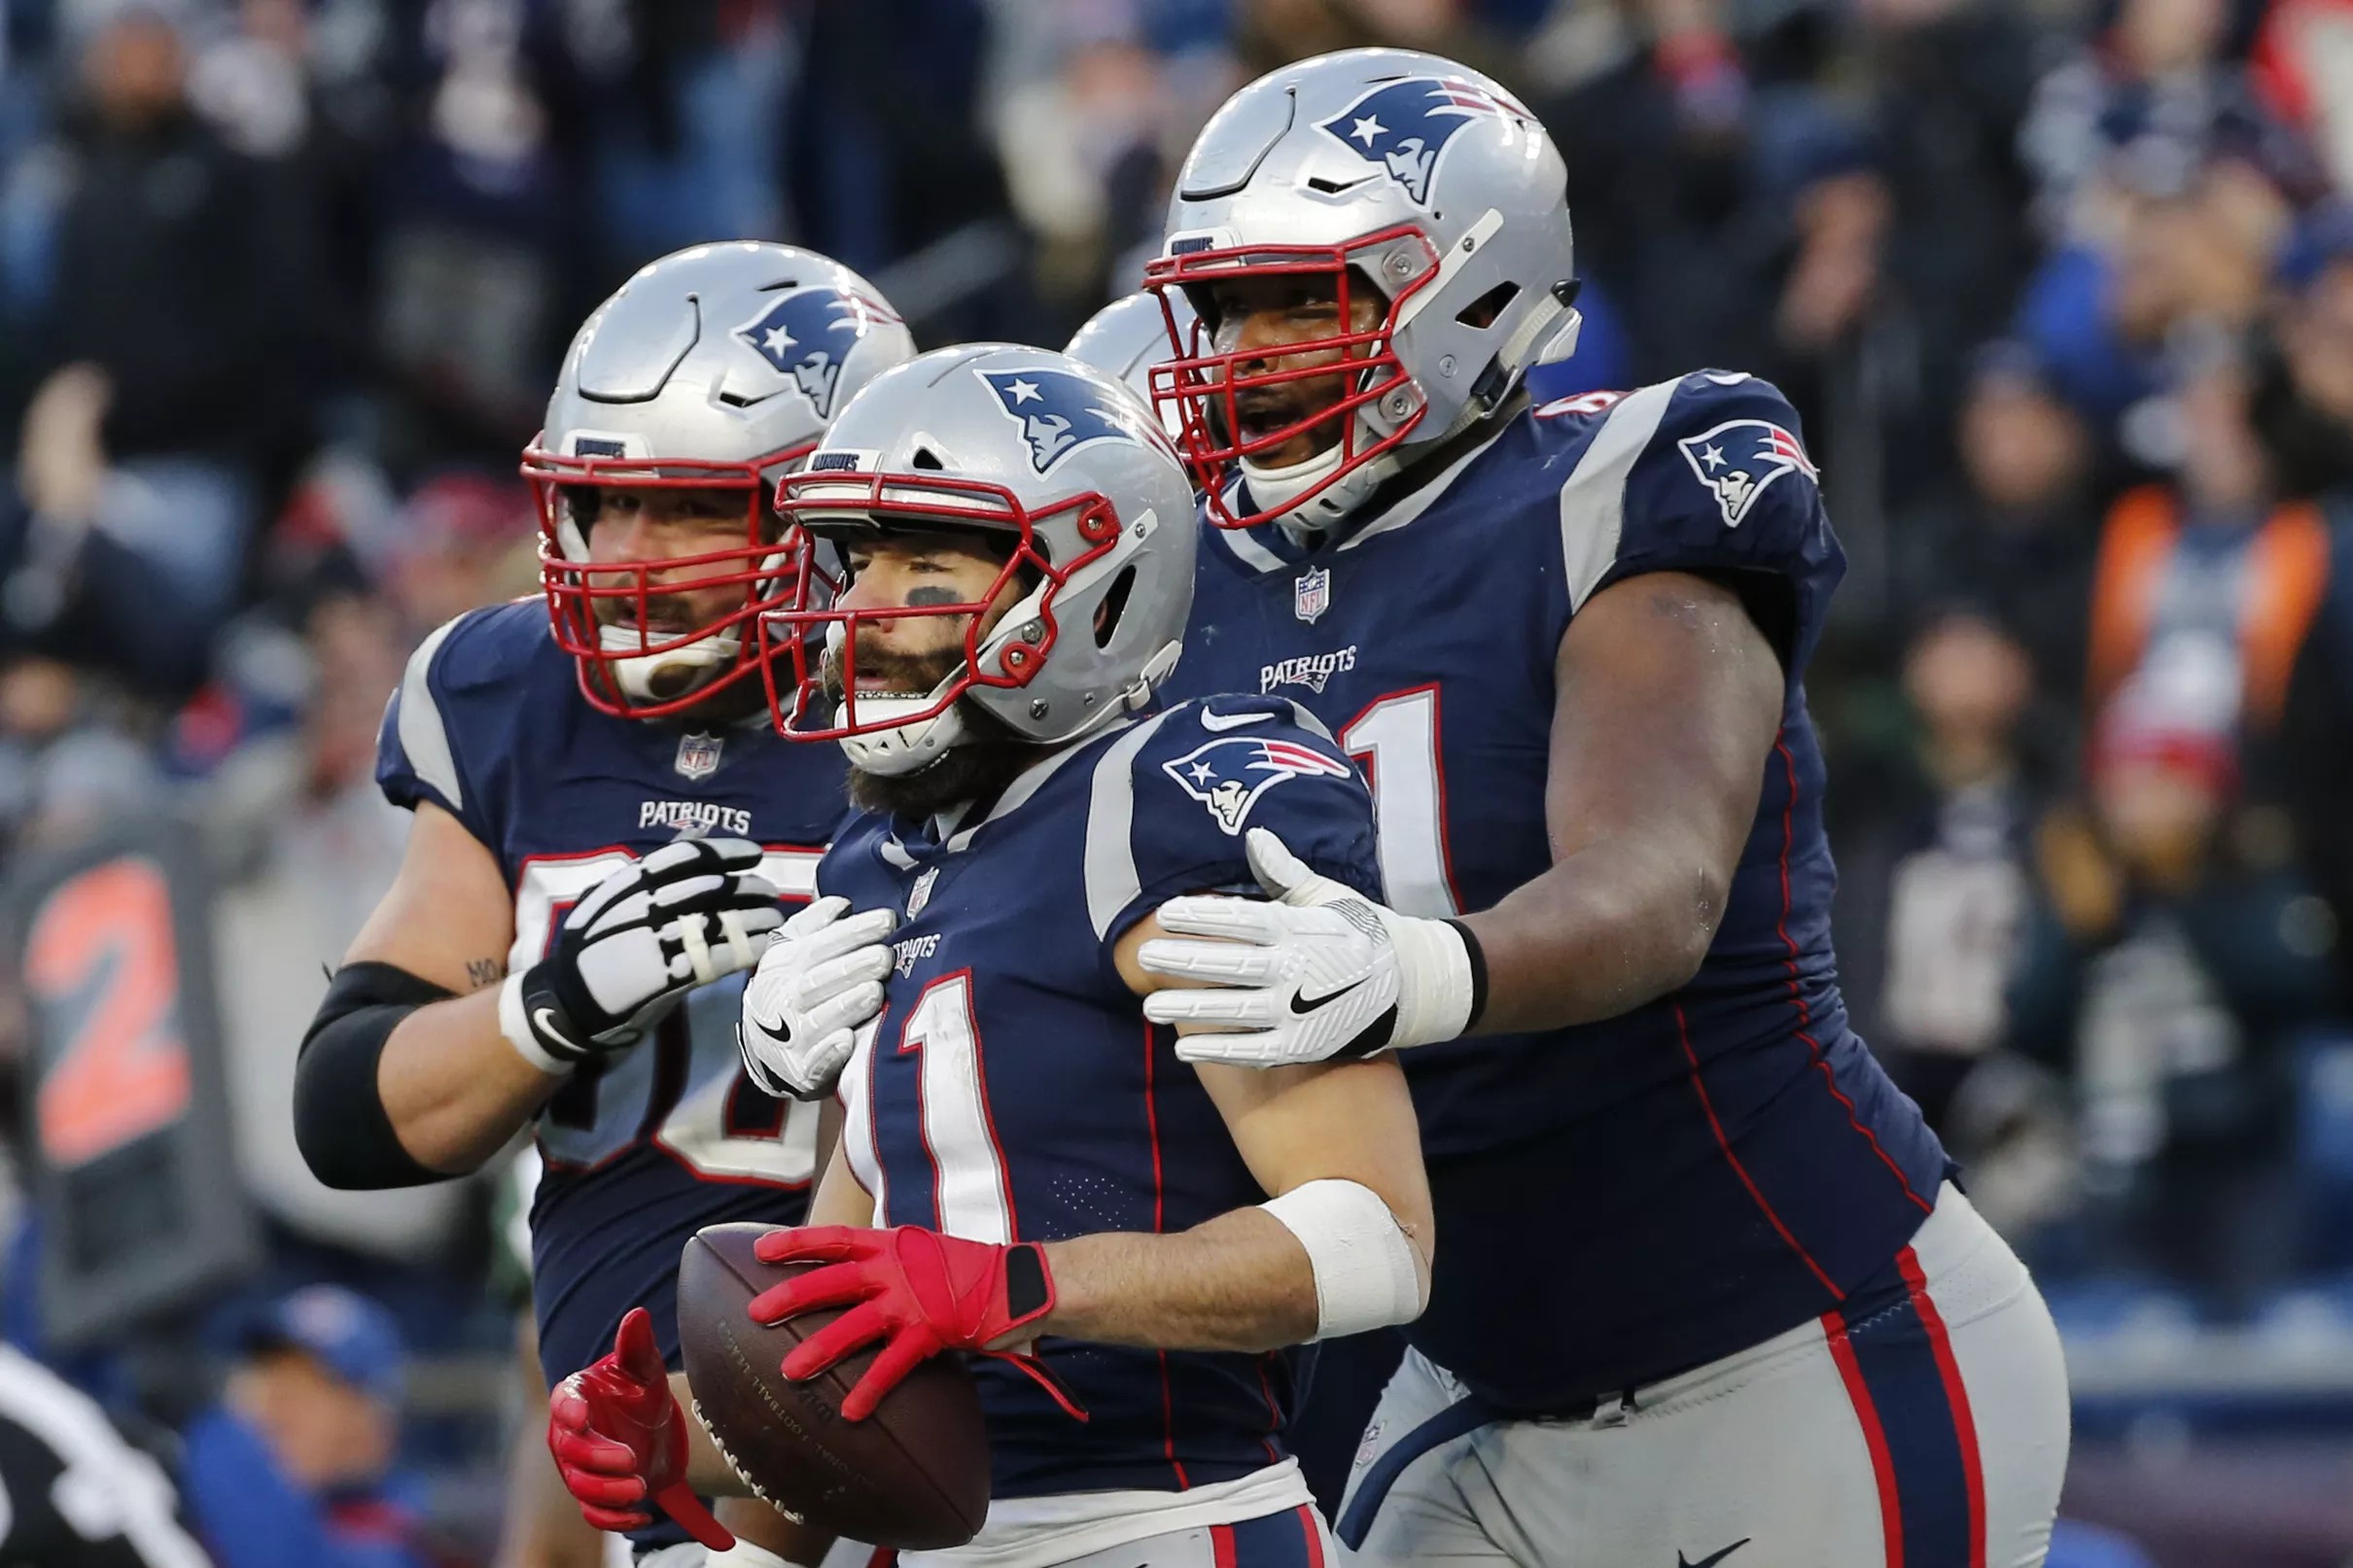 Pats Pulpit Podcast Episode 134: Patriots clinch a first round bye!